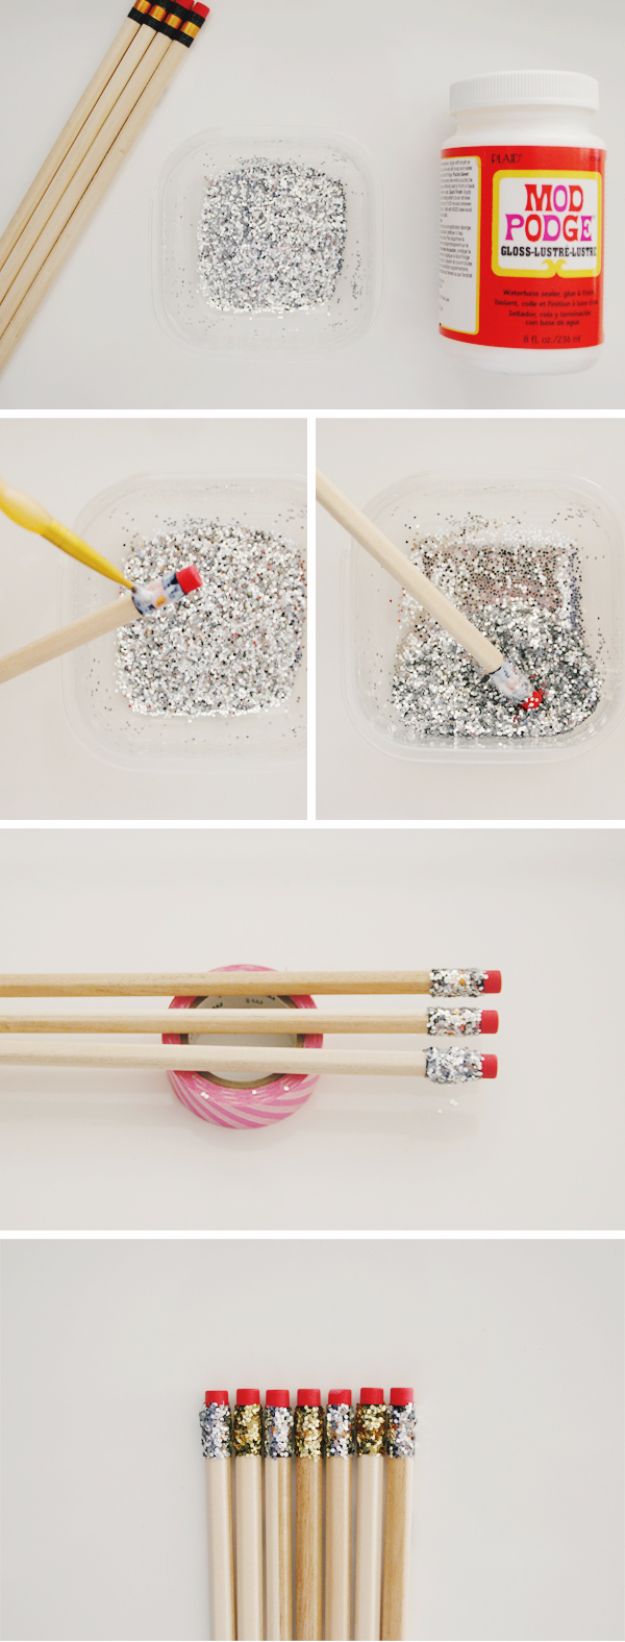 DIY Ideas WIth Glitter - DIY Glitter Pencils - Easy Crafts and Projects for Decoration, Gifts, and Bedroom Decor - How To Make Ombre, Mod Podge and Glitter Mason Jar Gift Ideas For Teens - Easy Clothes and Makeup Crafts For Teenagers #diyideas #glitter #crafts